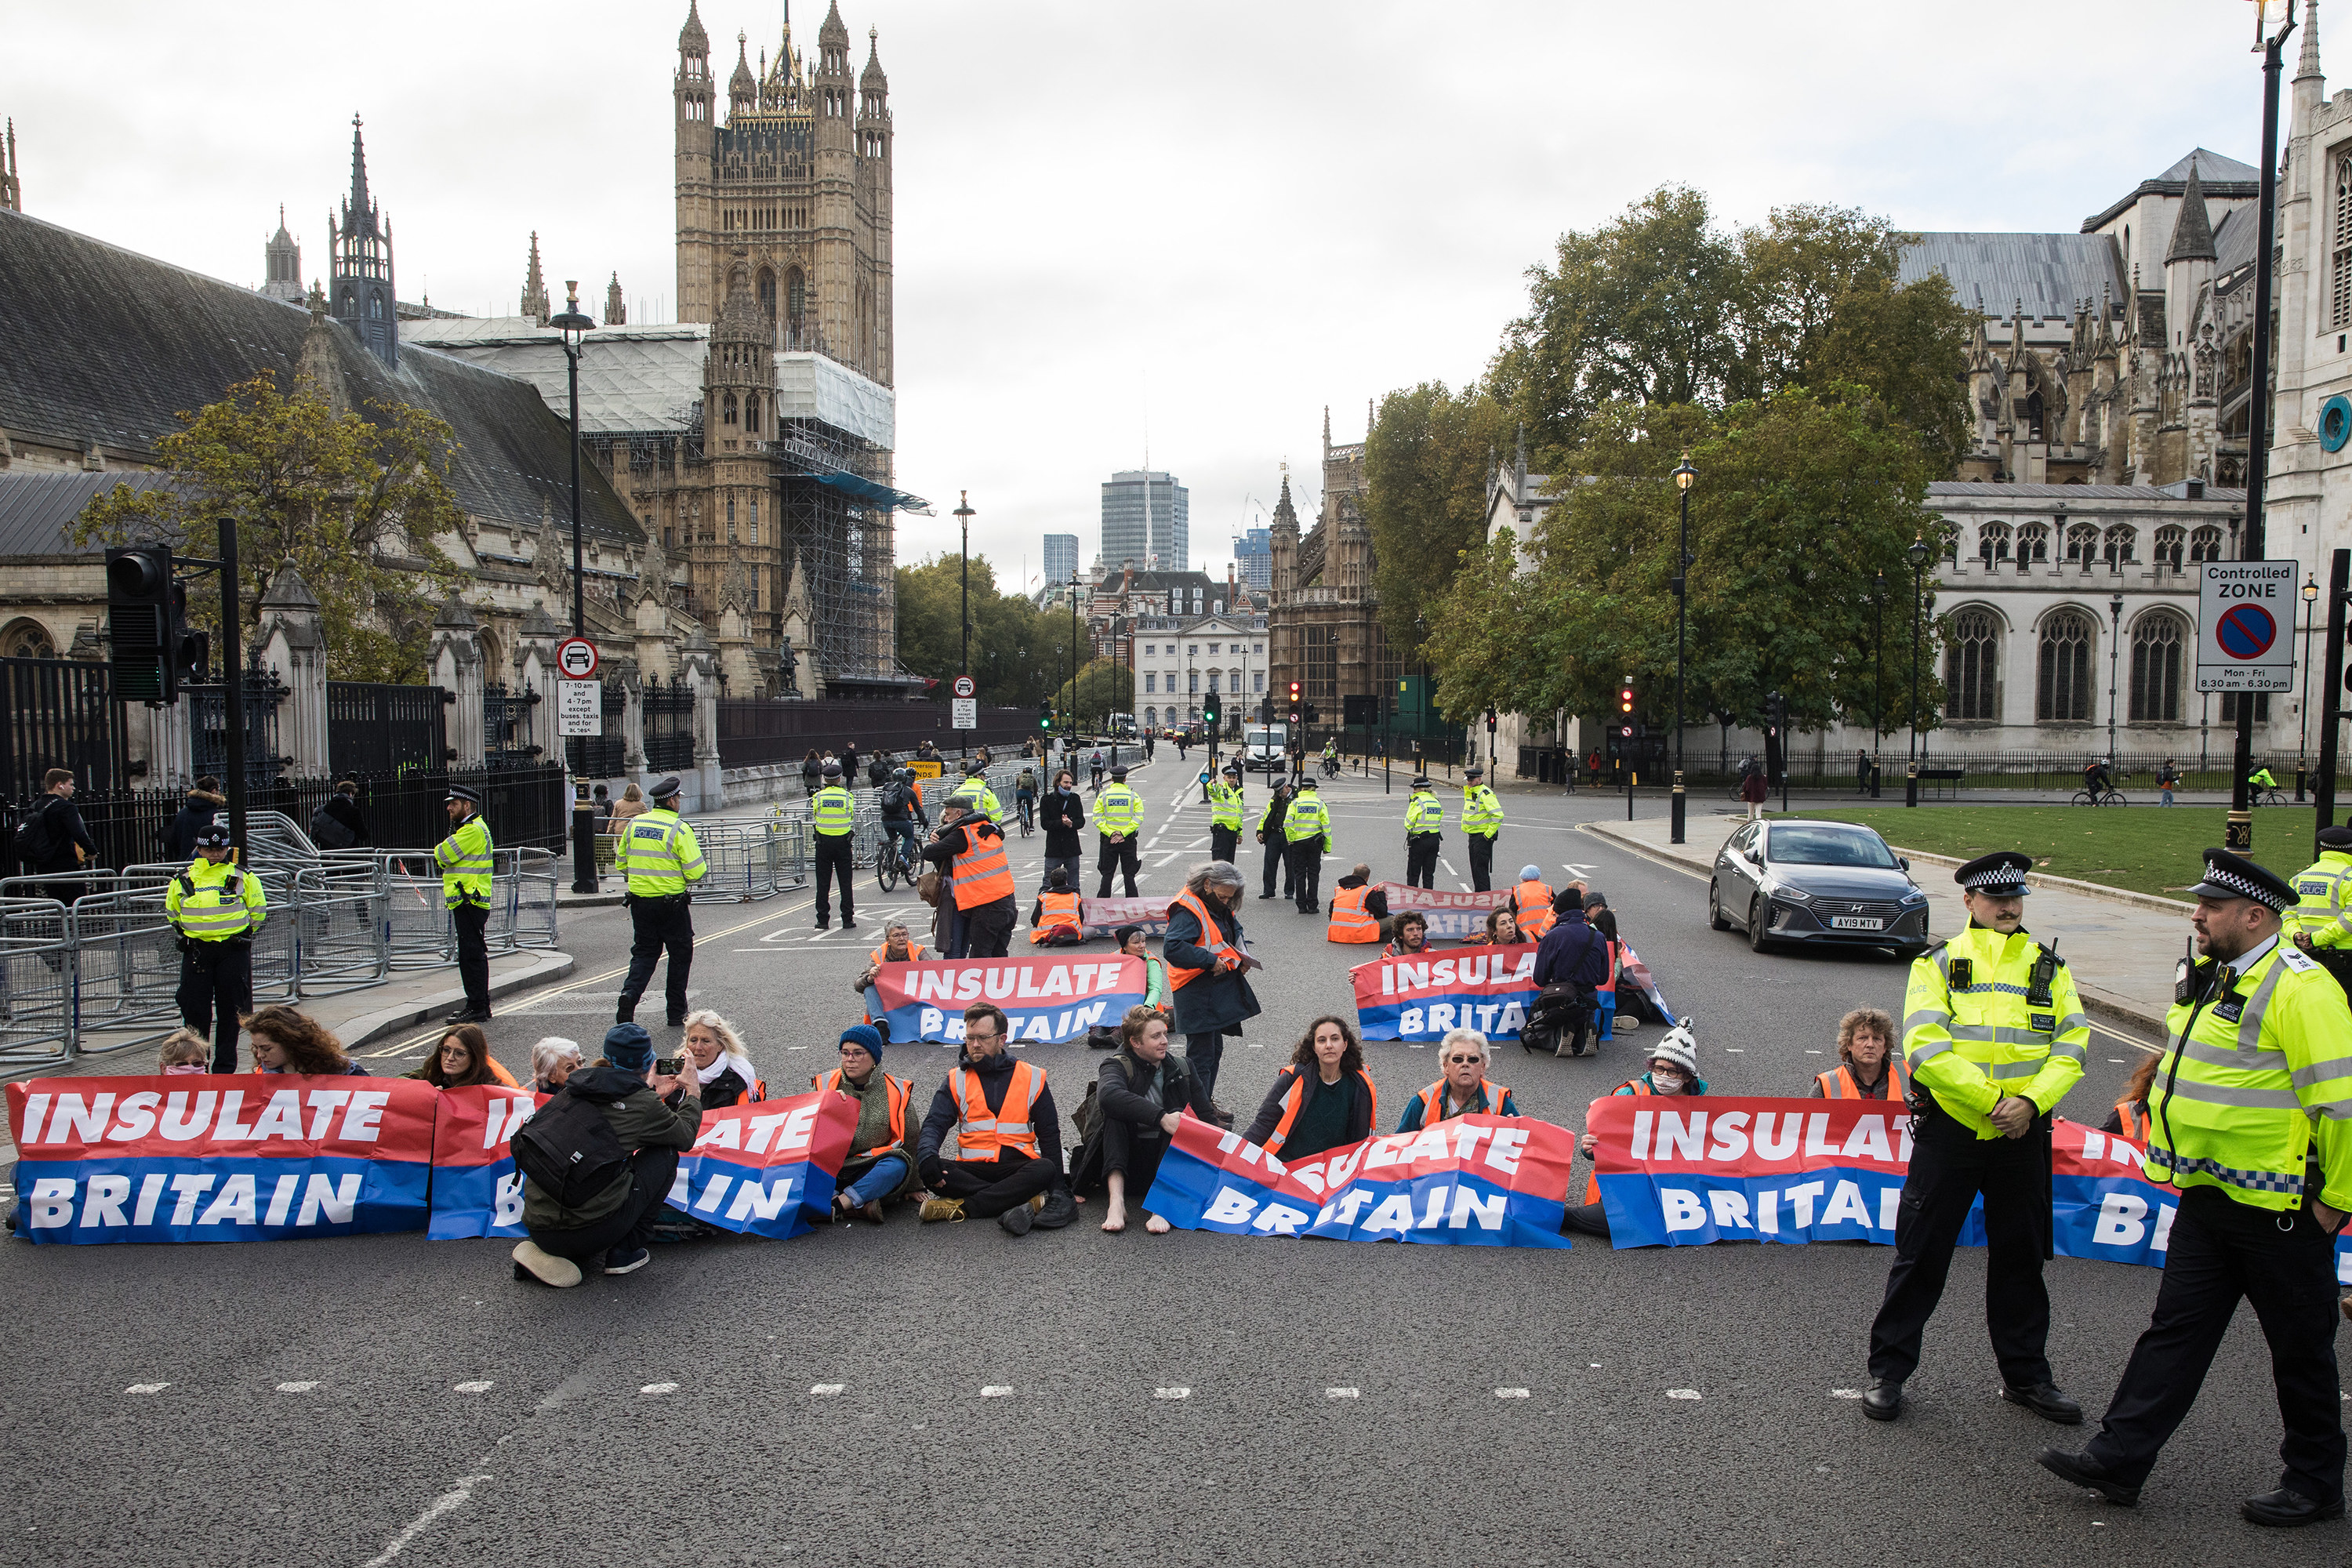 People sit in the middle of a street and hold up banners that read &quot;insulate Britain&quot;